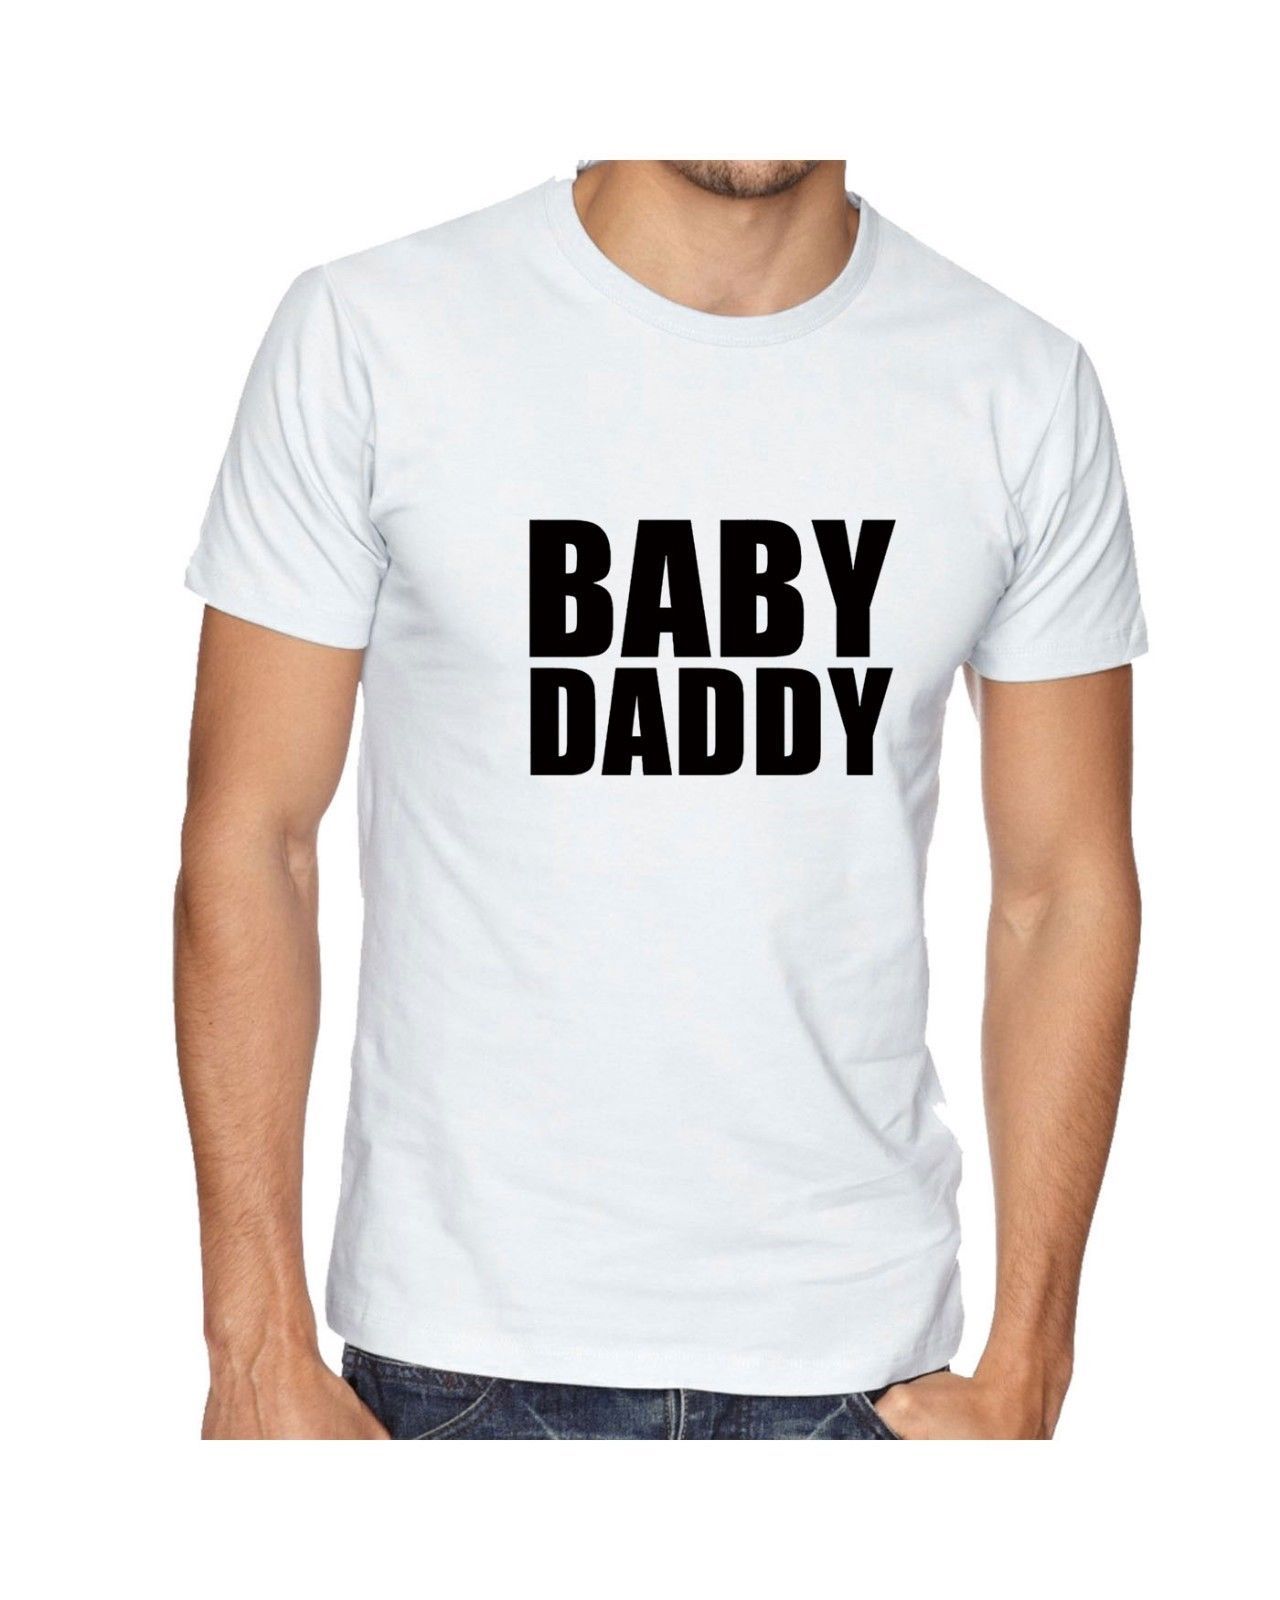 Baby Daddy T Shirts Funny - Unisex Baby Clothes